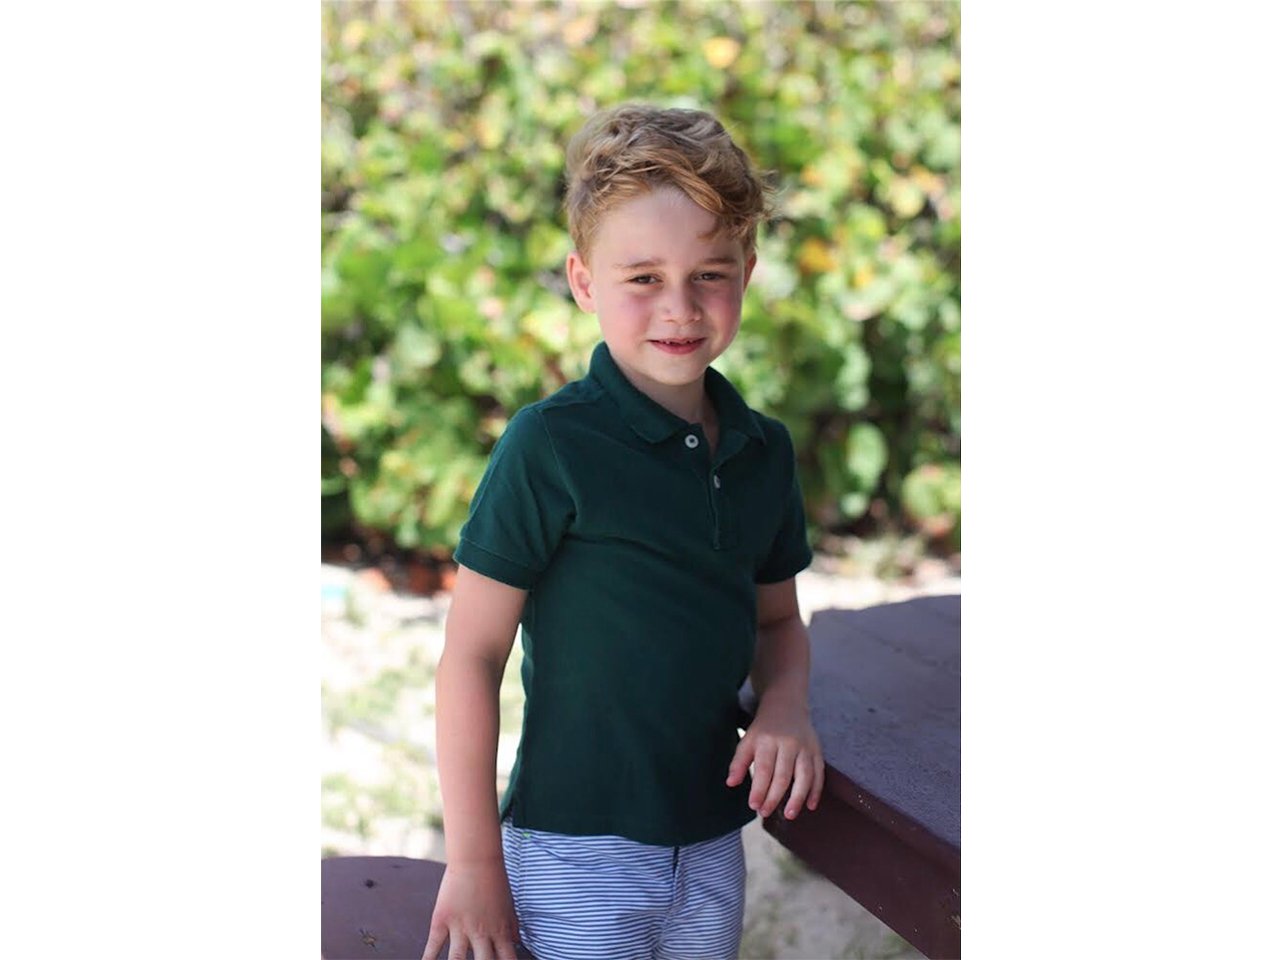 Prince George posing in a green polo shirt